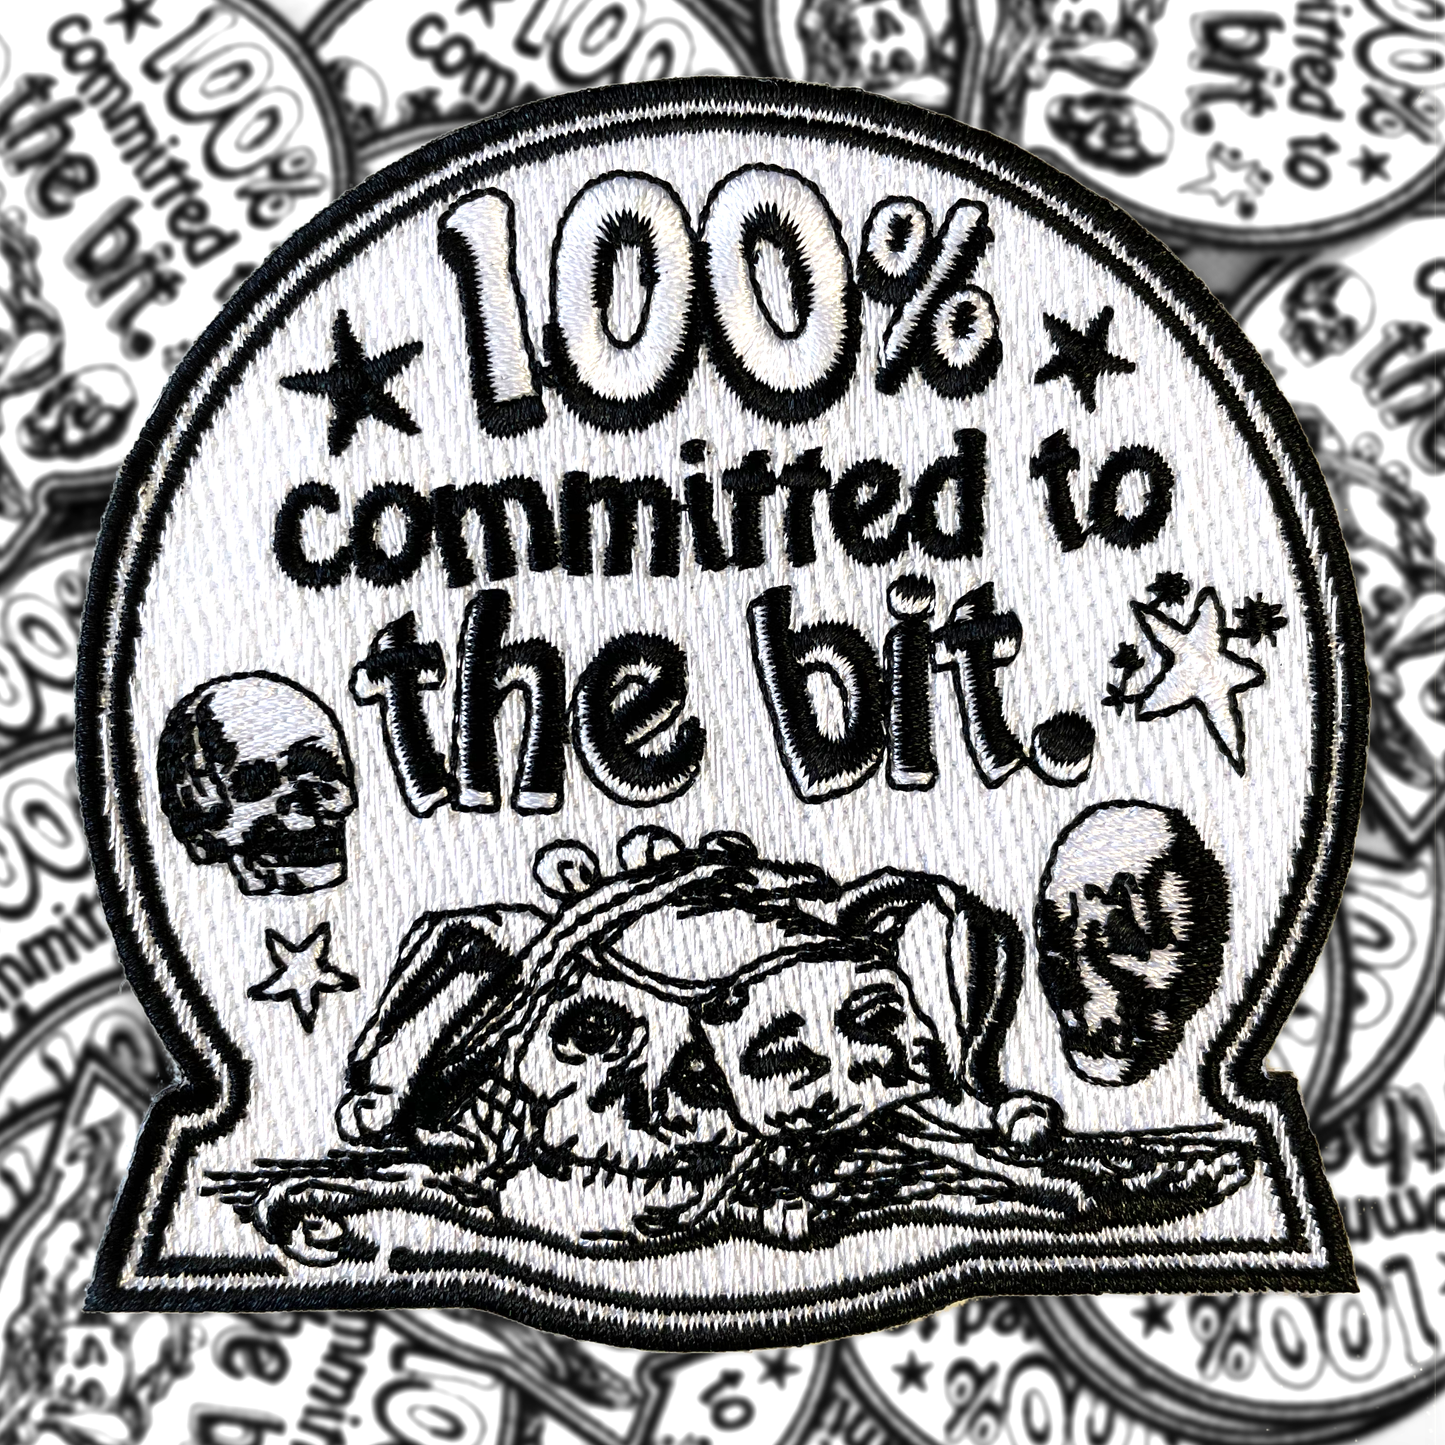 "Committed To The Bit" Patch